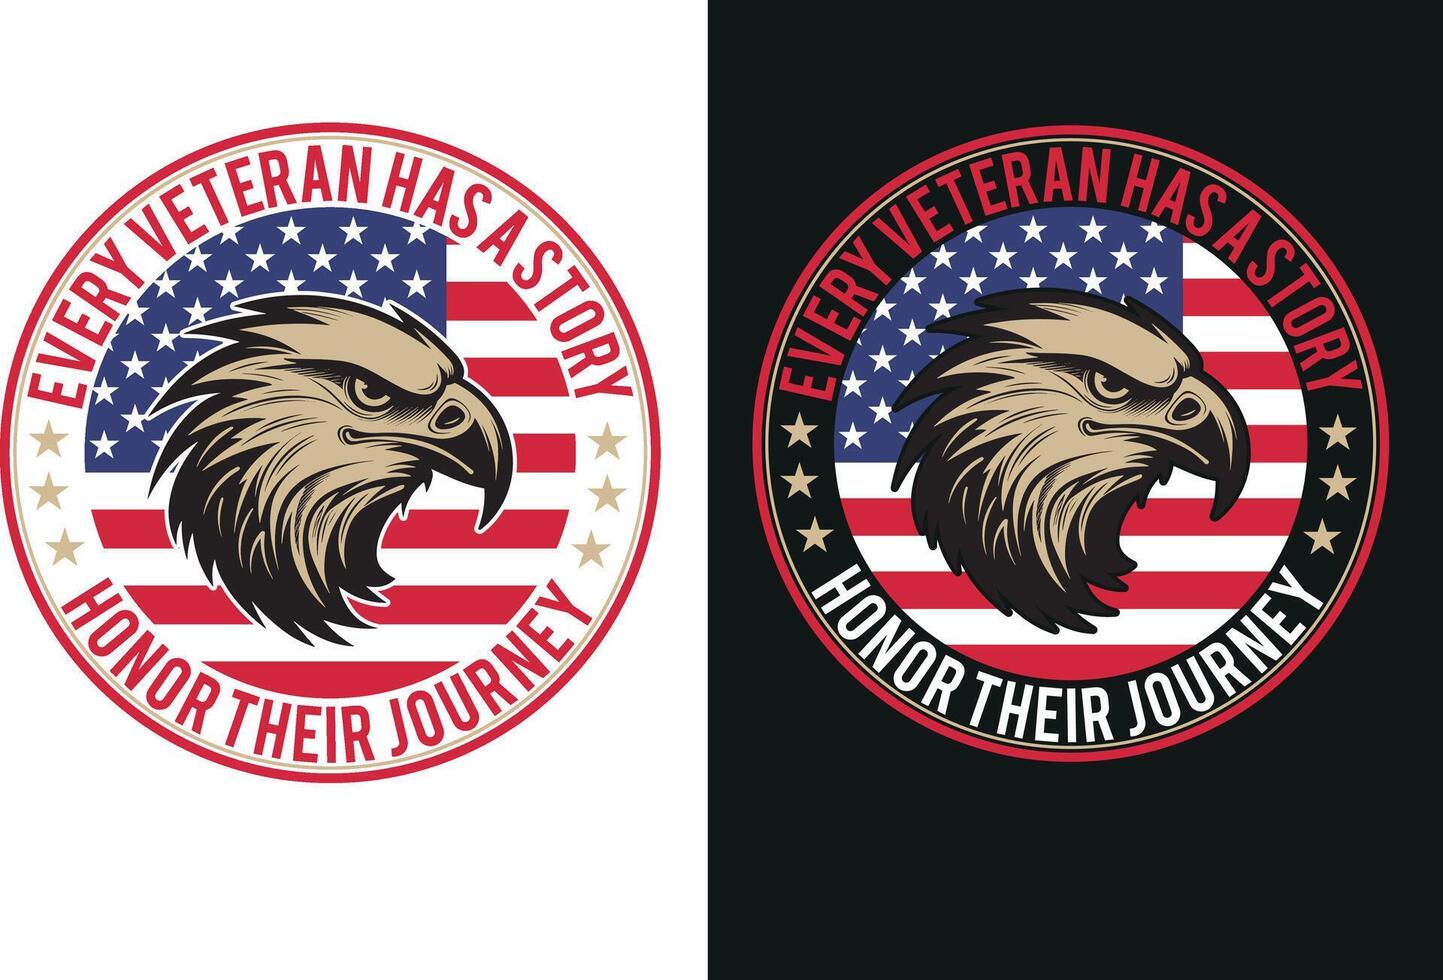 Every Veterans Has A Story Honor Their Journey vector